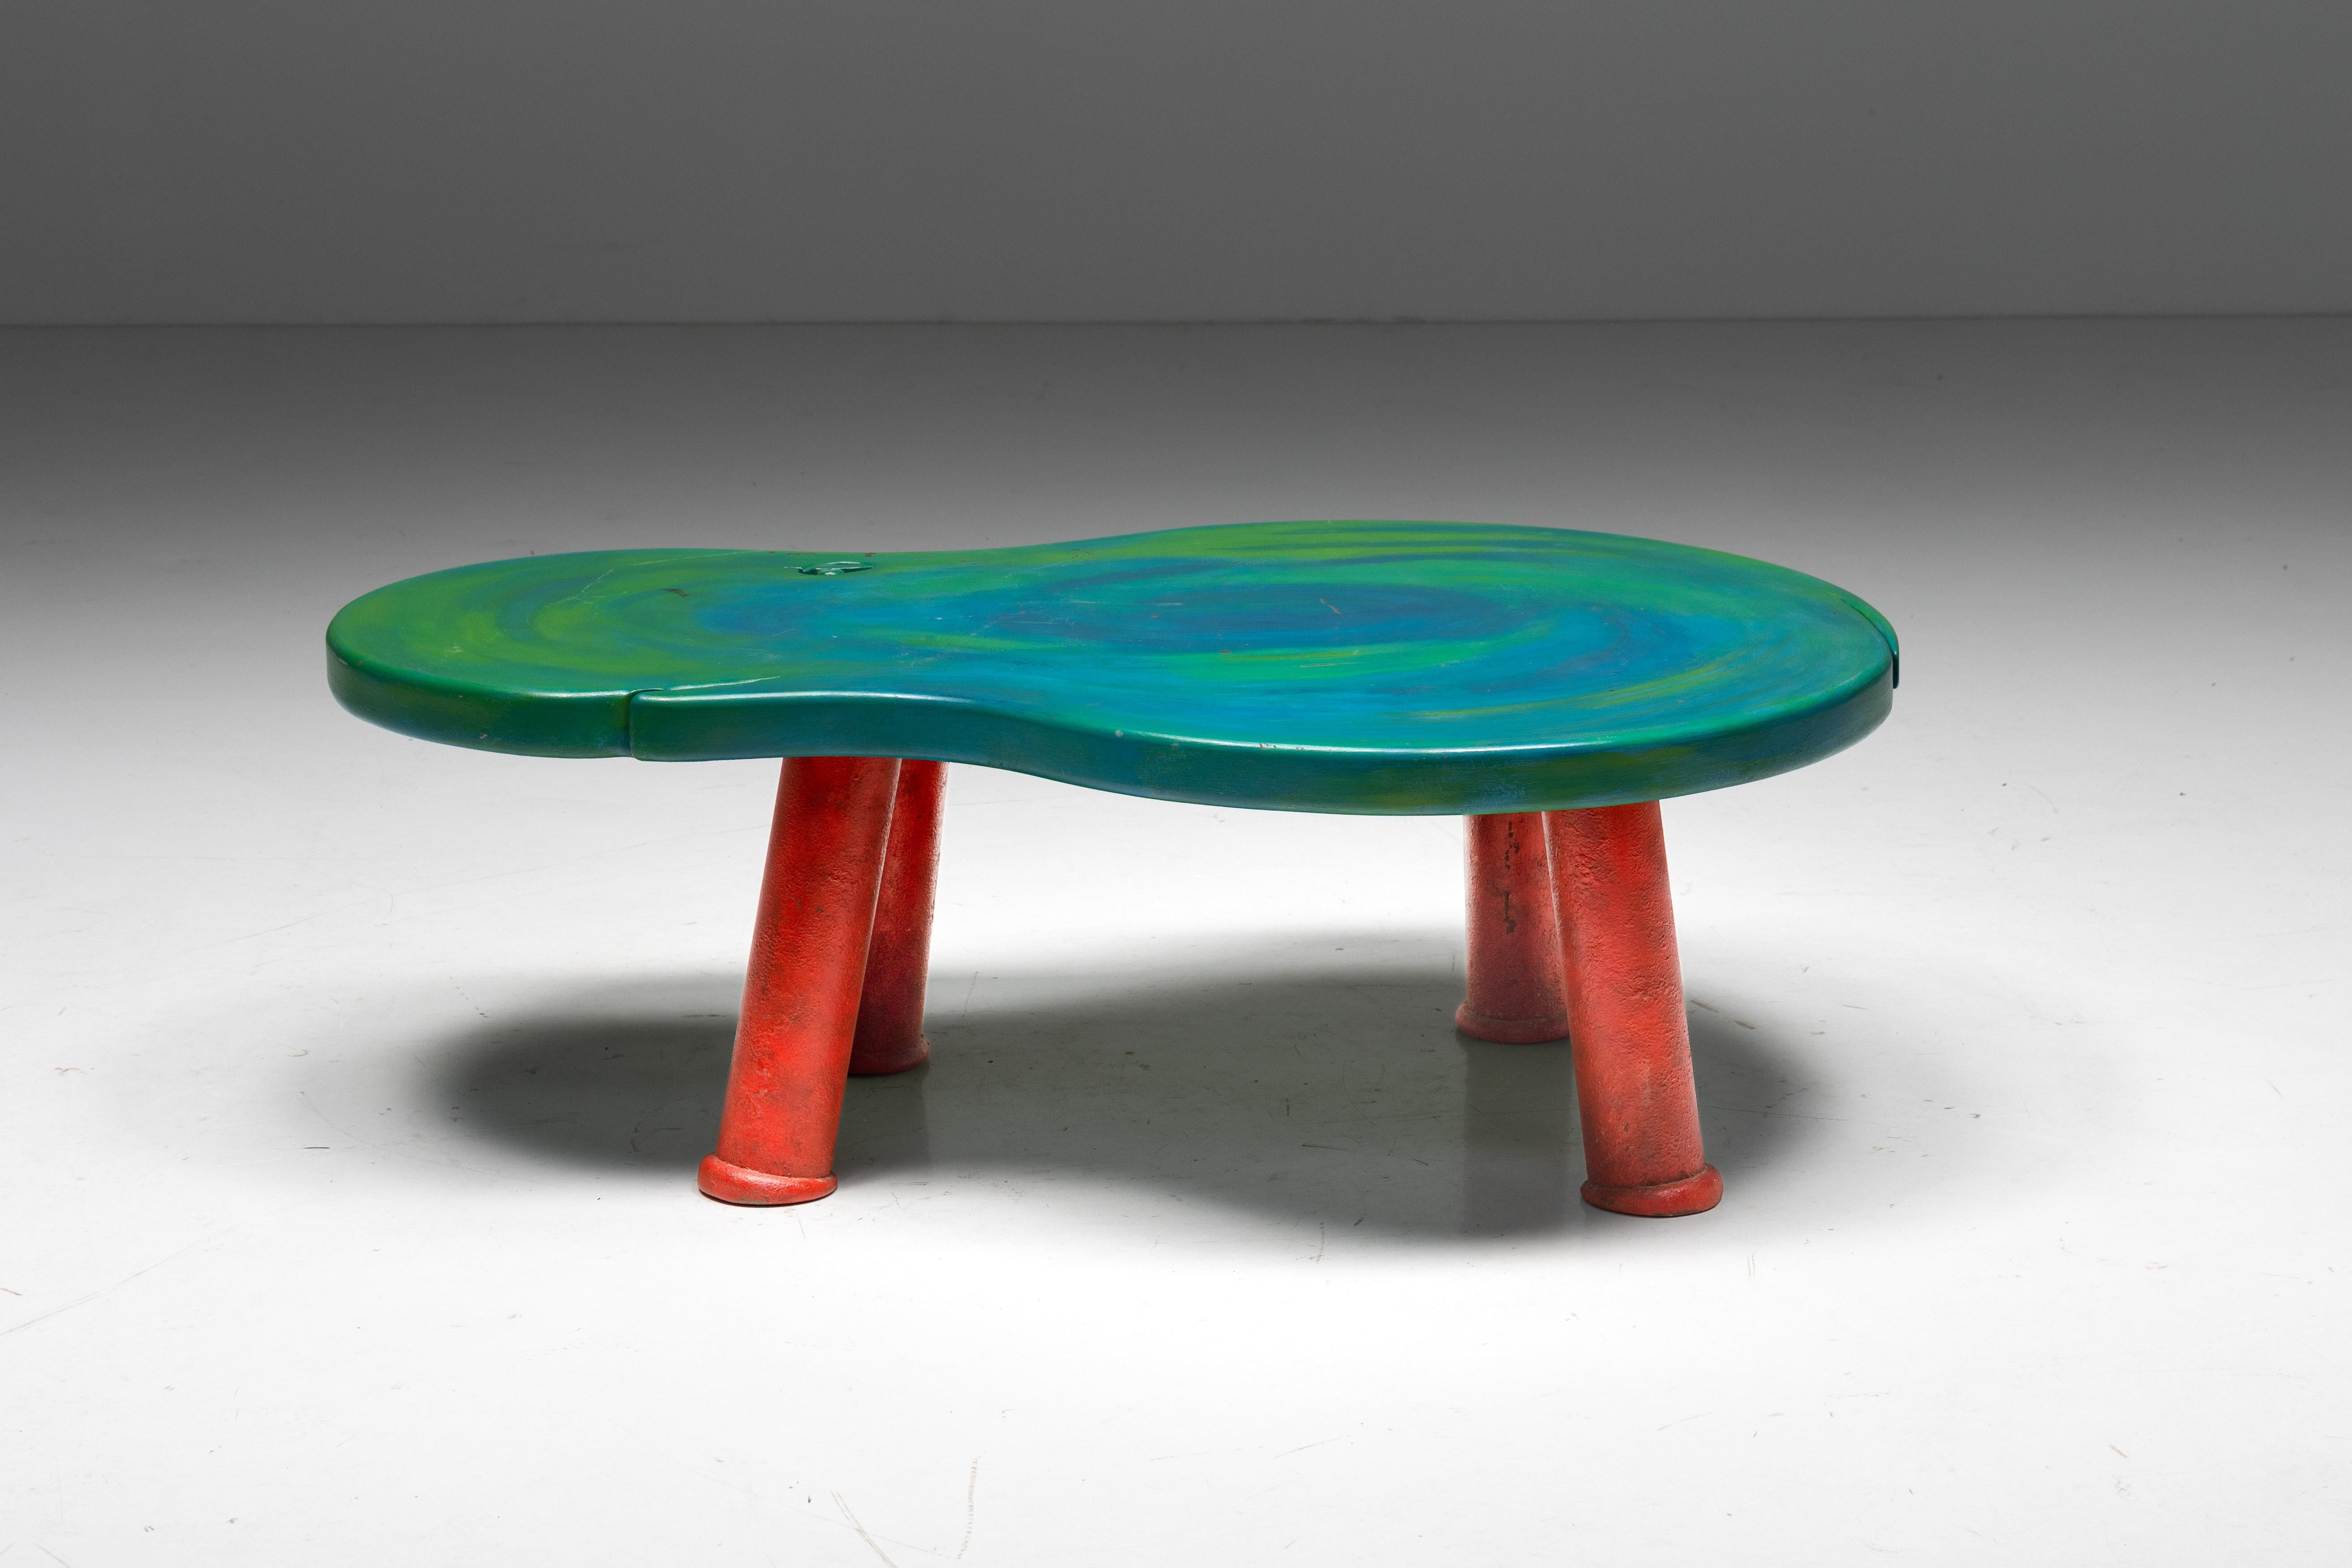 Memphis Style; Gaetano Pesce; Modern; Postmodern; Italy; Modernism; Free Form; Organic Design; 1990s; 

Organic coffee table by Gaetano Pesce, crafted in Italy during the iconic 1990s era. This coffee table stands as a testament to the artistic